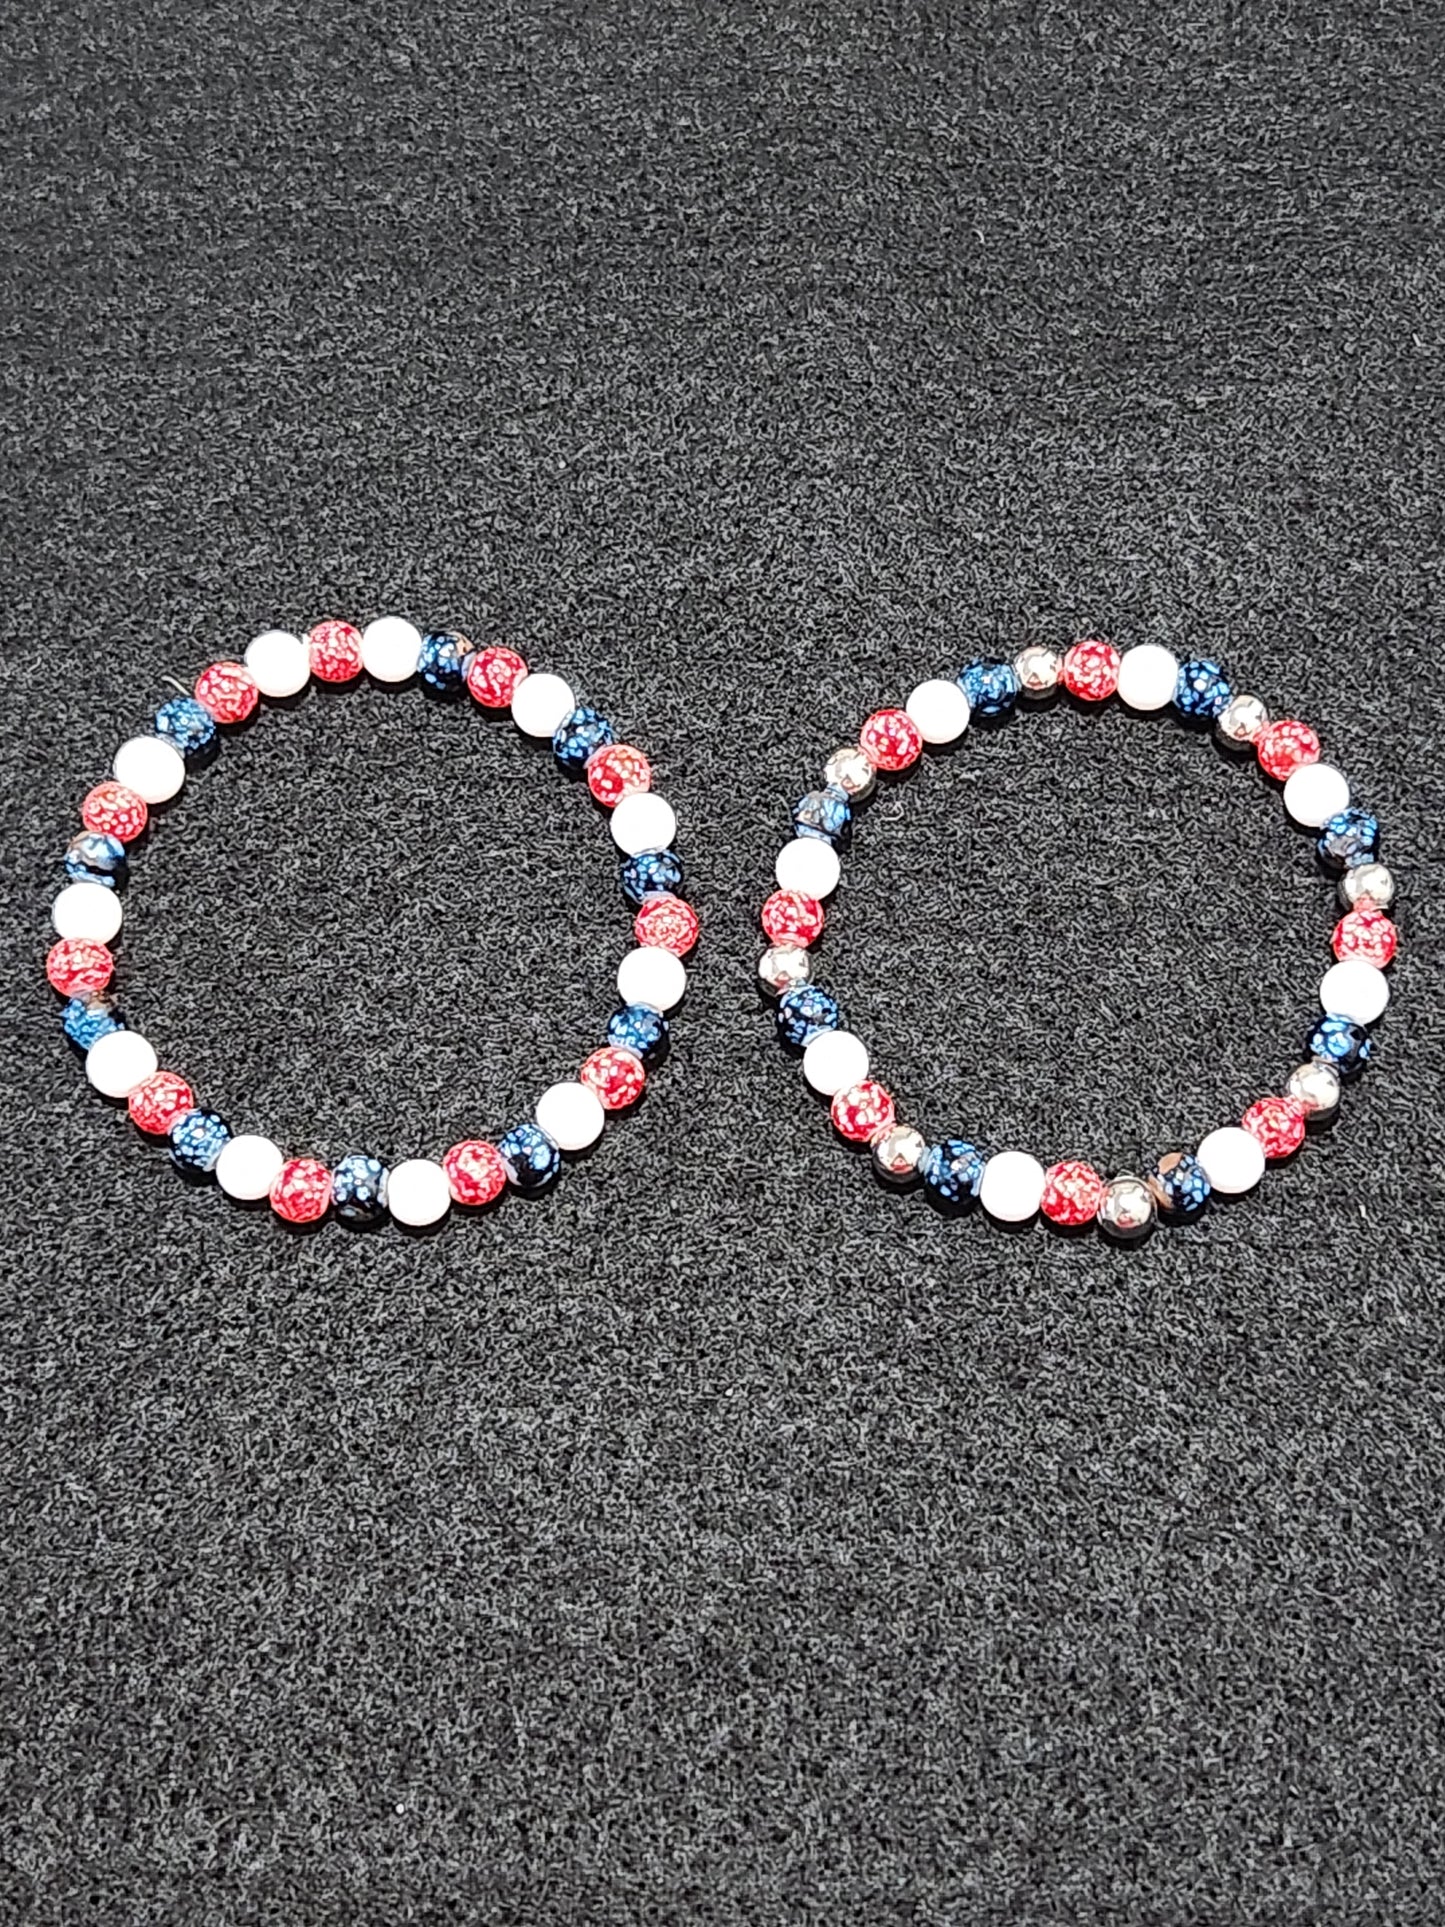 Patriotic Bracelets - set of 2 - Memorial Day, Veterans Day, 4th of July - The New Year